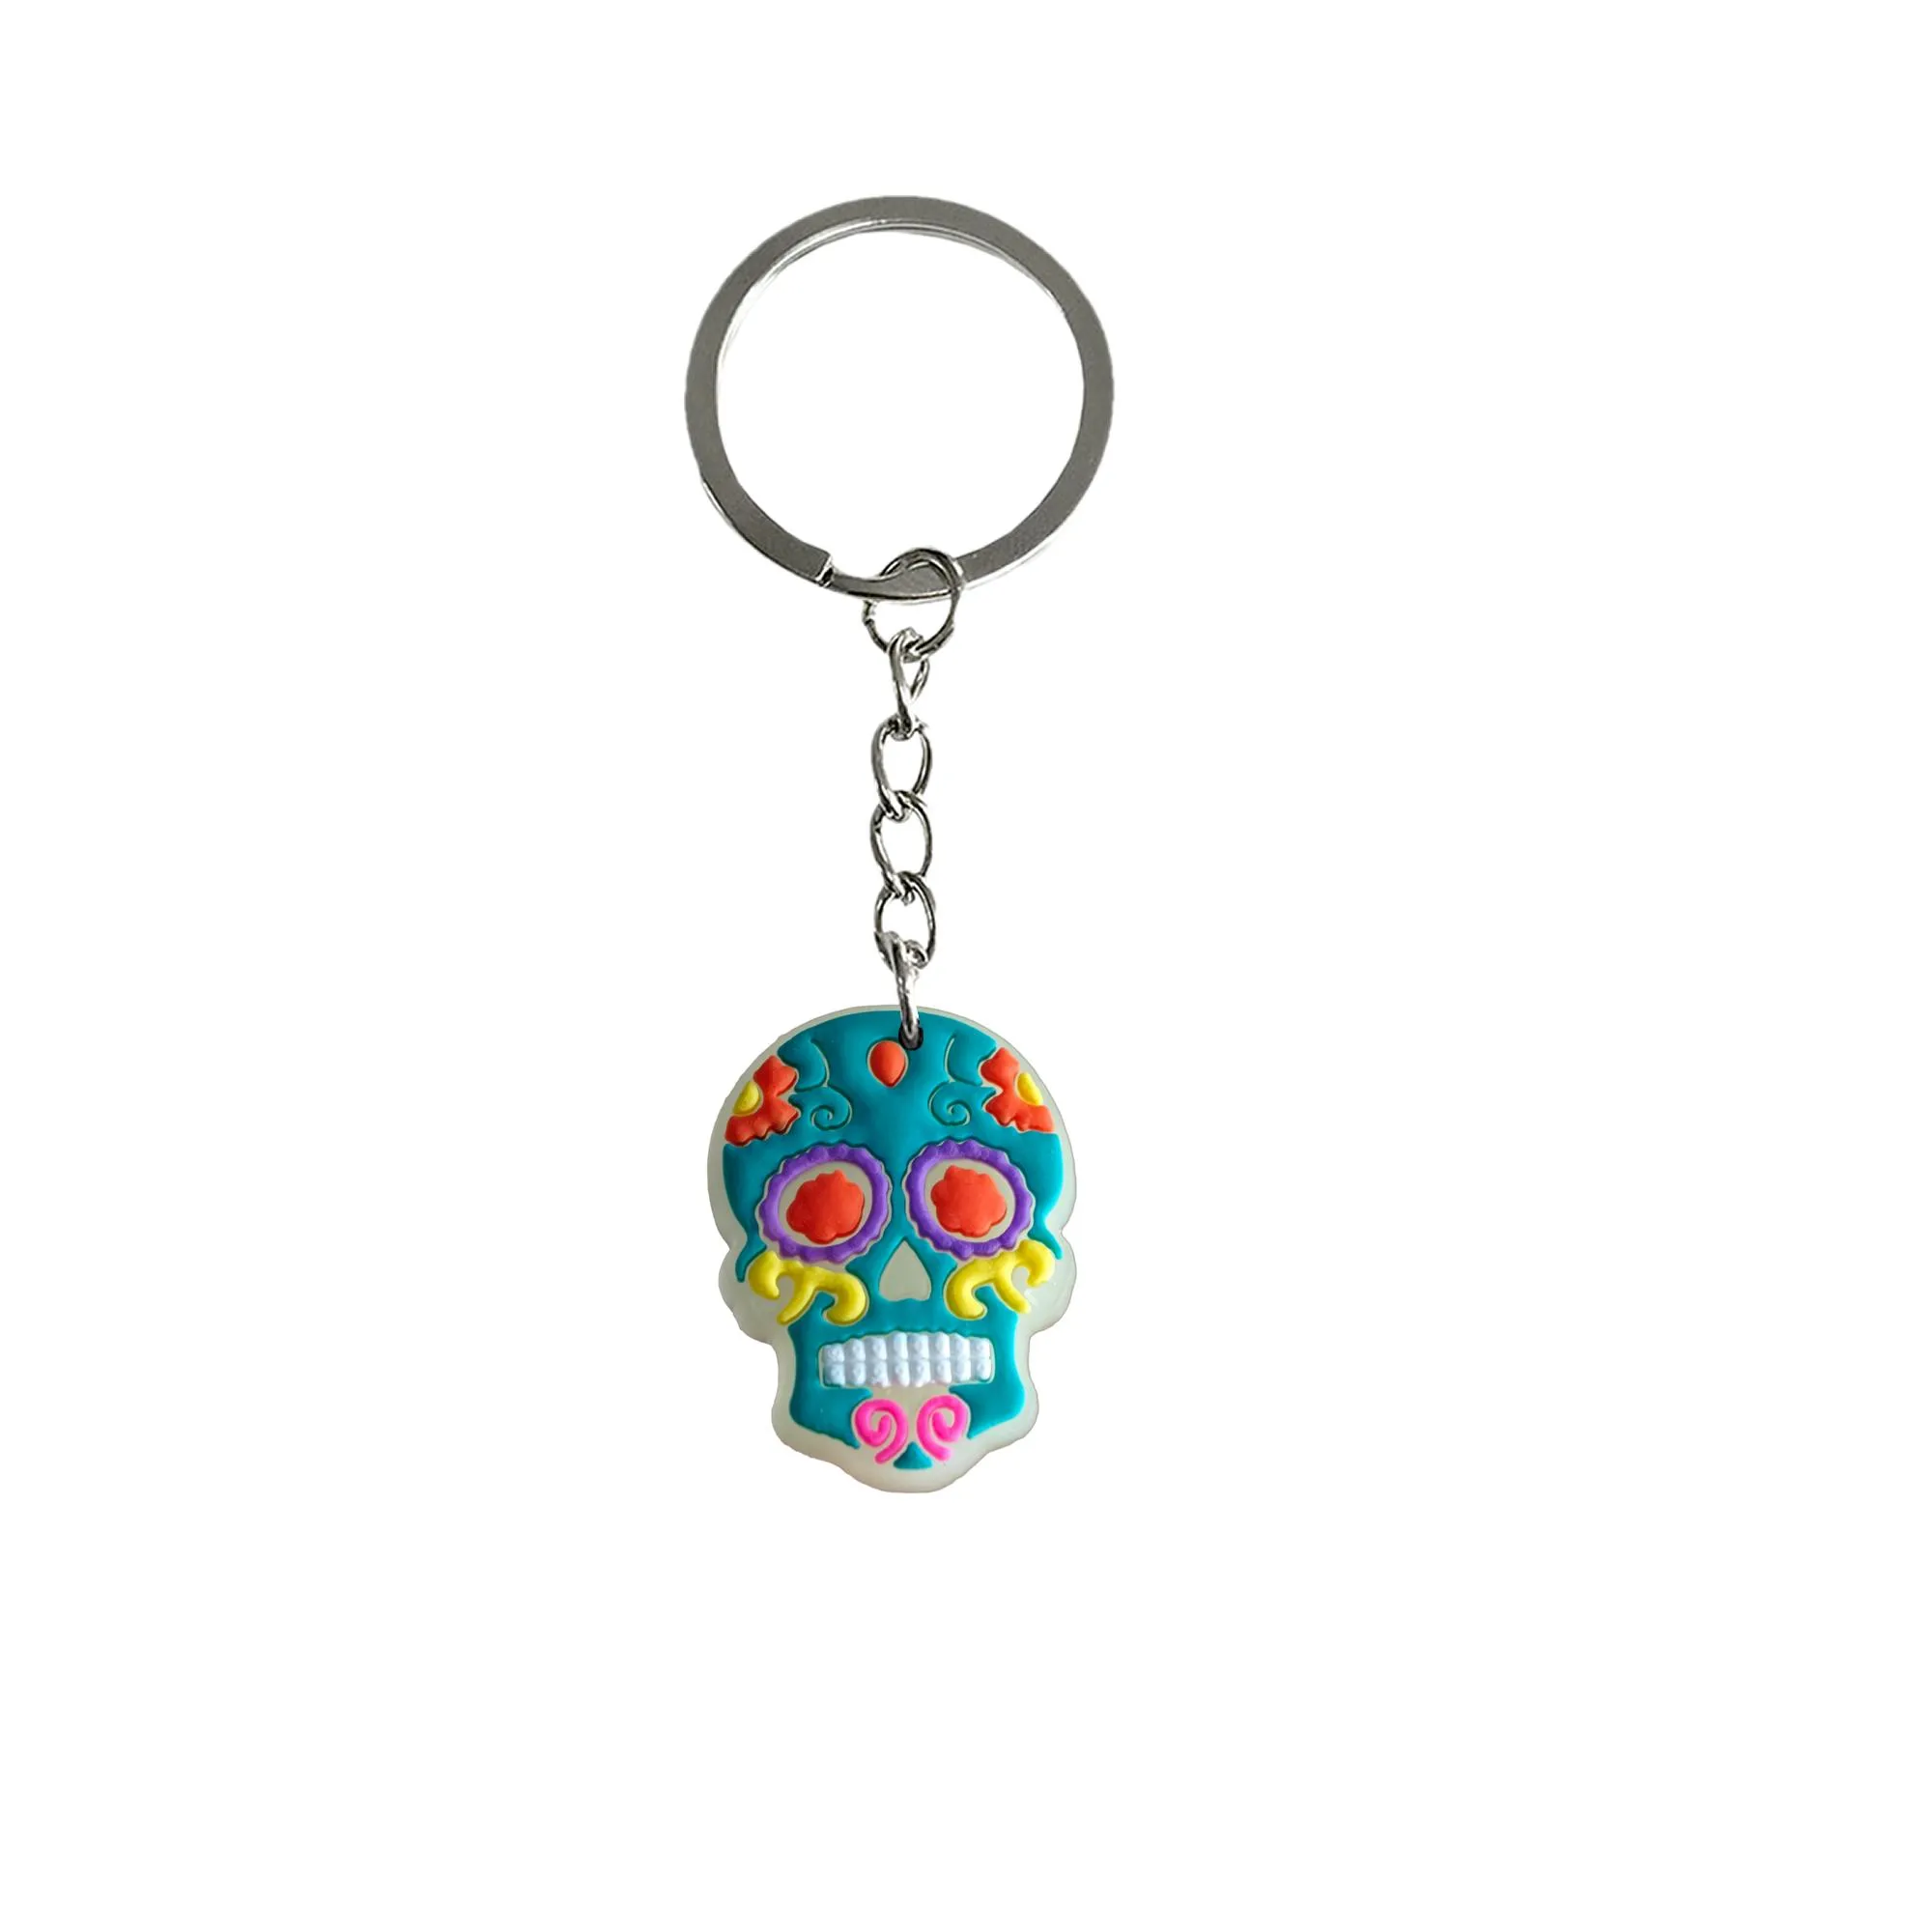 fluorescent skull head keychain key chain for party favors gift keychains tags goodie bag stuffer christmas gifts and holiday charms girls keyring suitable schoolbag backpack shoulder pendant accessories charm handbag car valentines day men